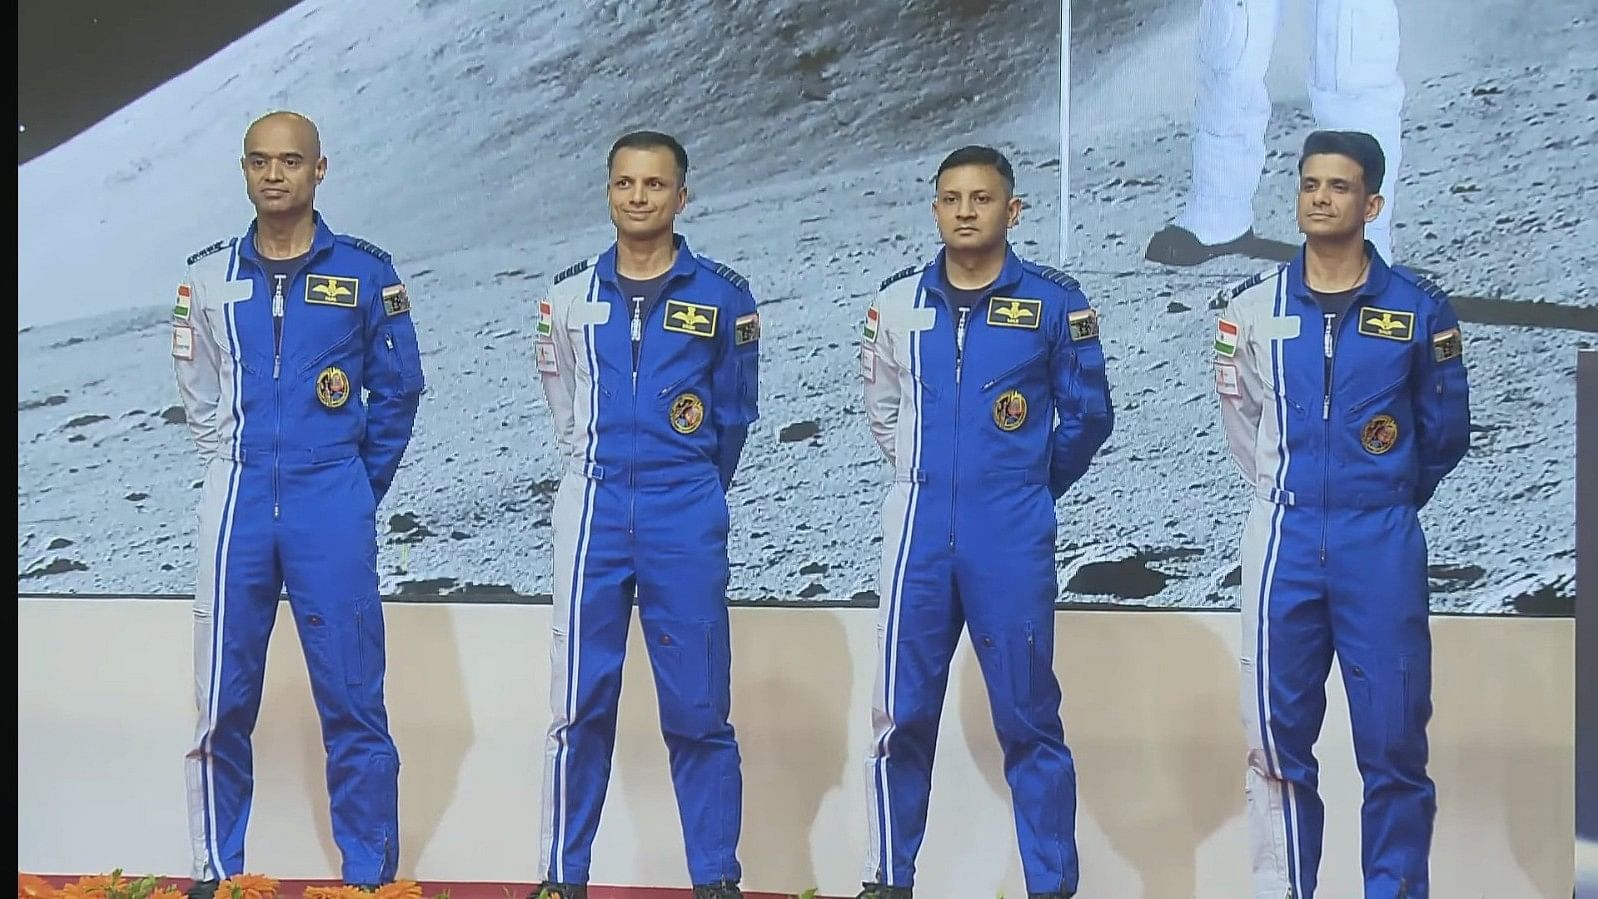 <div class="paragraphs"><p>Group Captains Prasanth Balakrishnan Nair, Ajit Krishnan and Angad Pratap and Wing Commander Shubhanshu Shukla, the four astronauts selected for the Gaganyaan mission are bestowed ‘astronaut wings’ by Prime Minister Narendra Modi.</p></div>